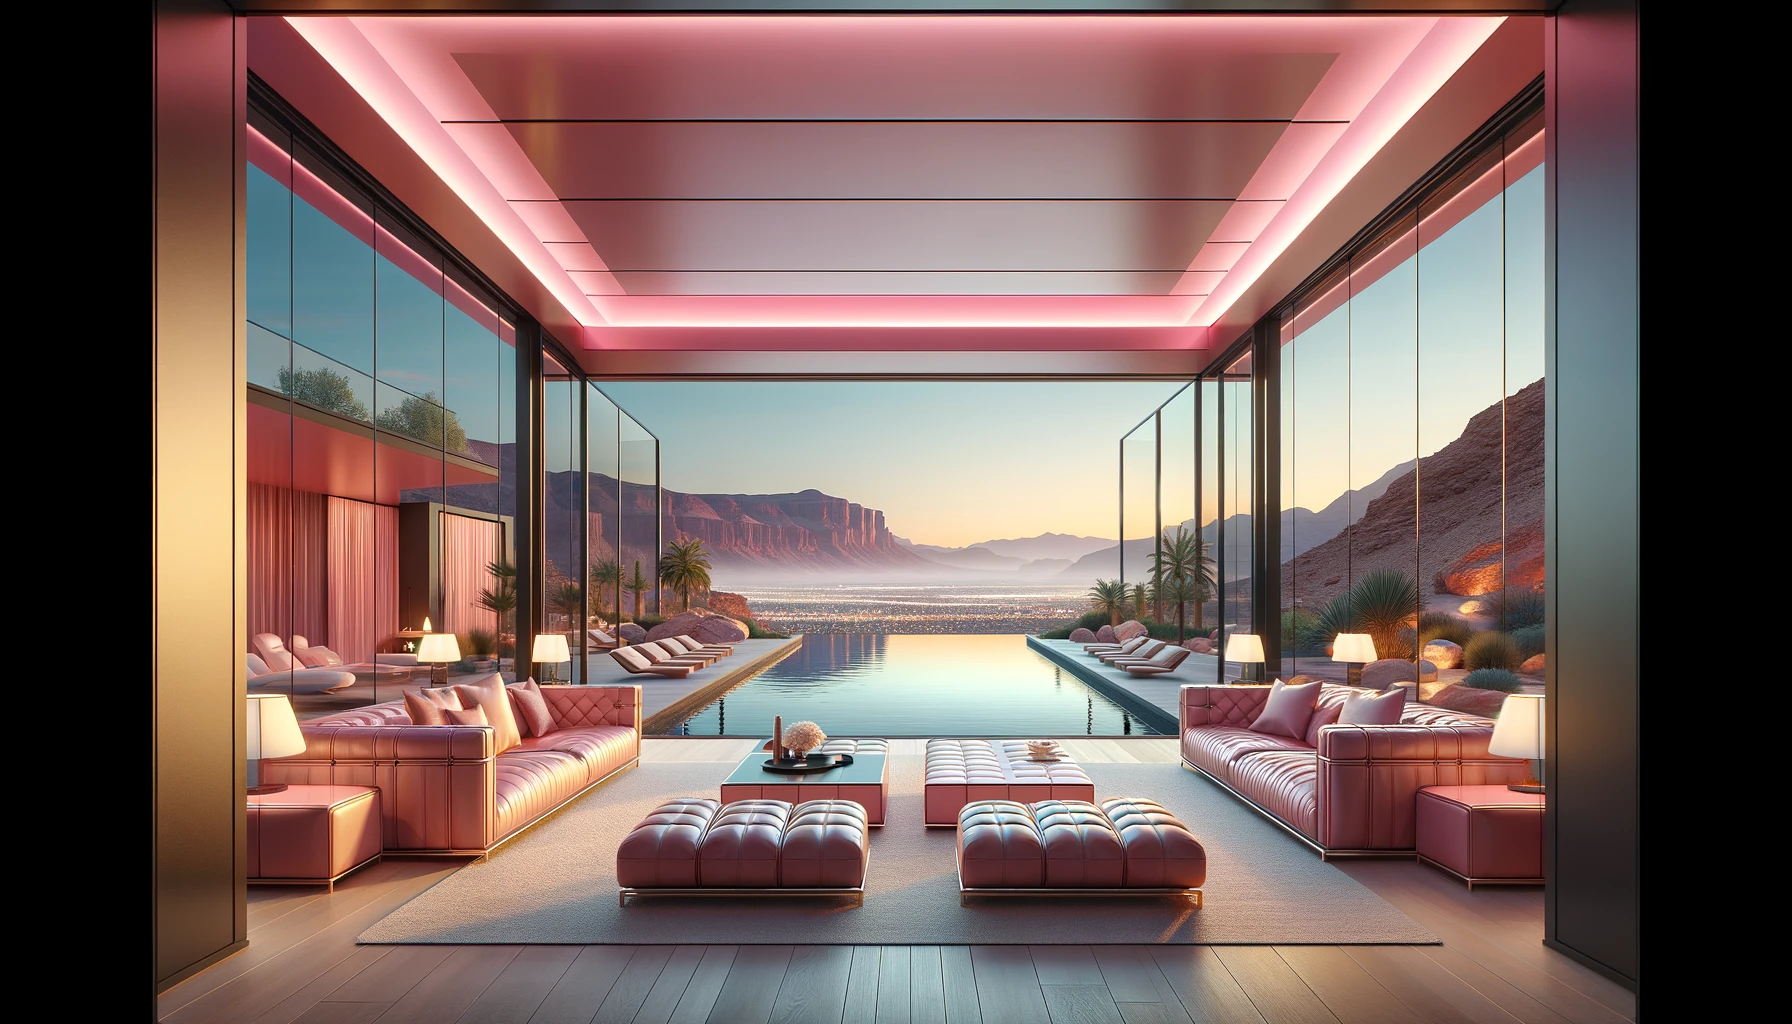 Pet Friendly Living Spaces: Modern home interior in bright pink (#e0218a) with luxurious leather furniture, overlooking an infinity pool and a Las Vegas desert landscape.